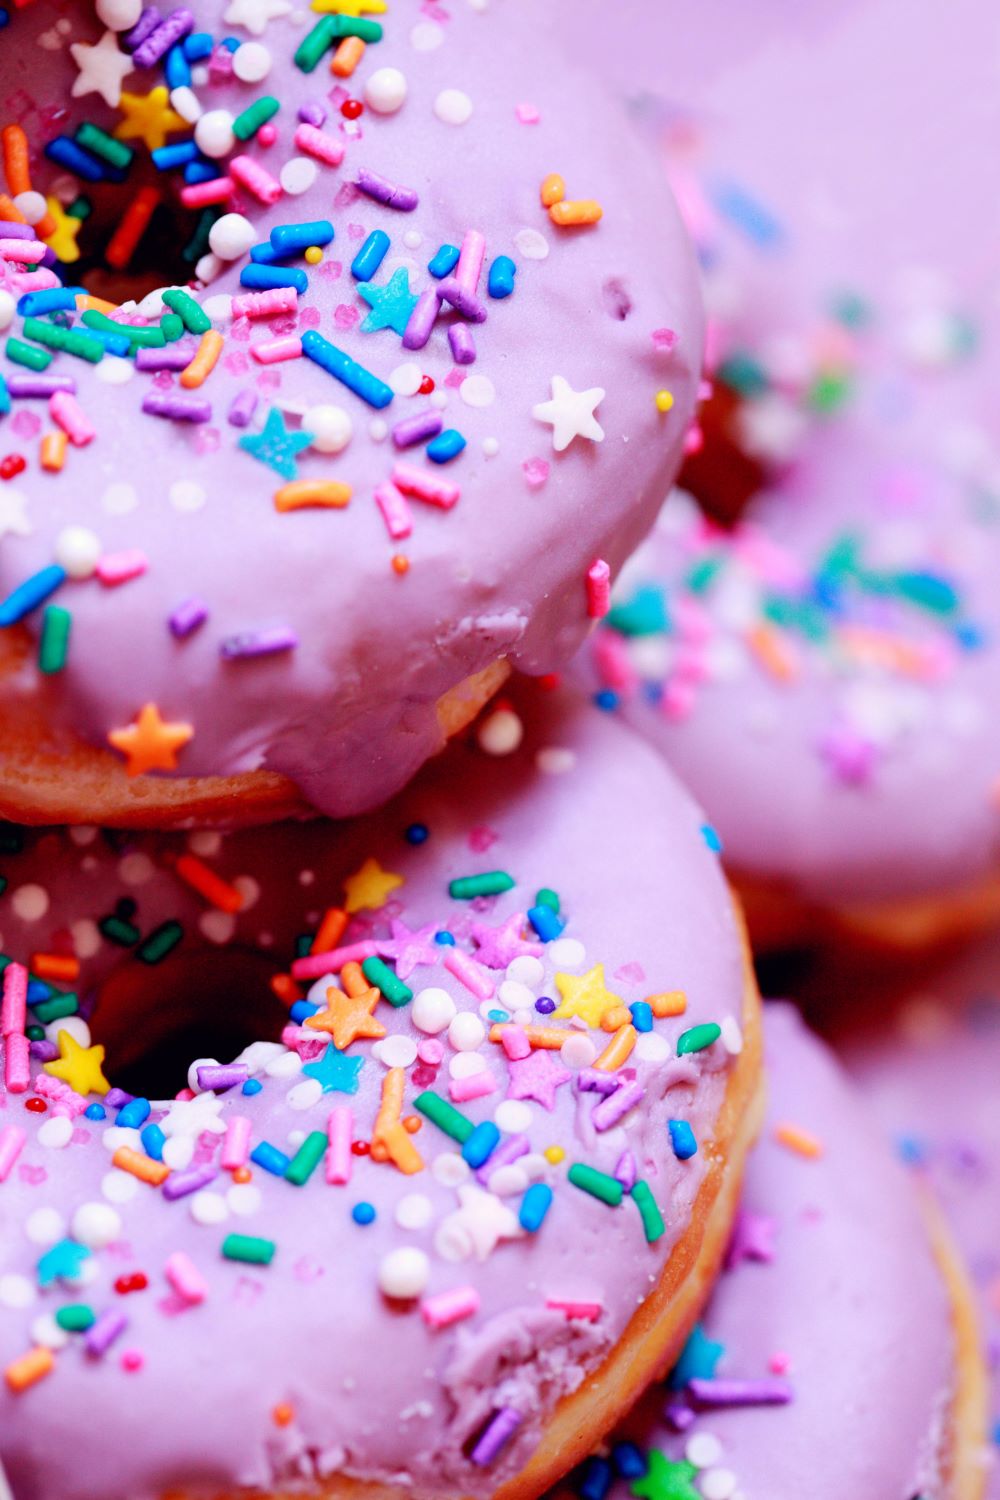 The Connection between Sugary Foods & Mental Health